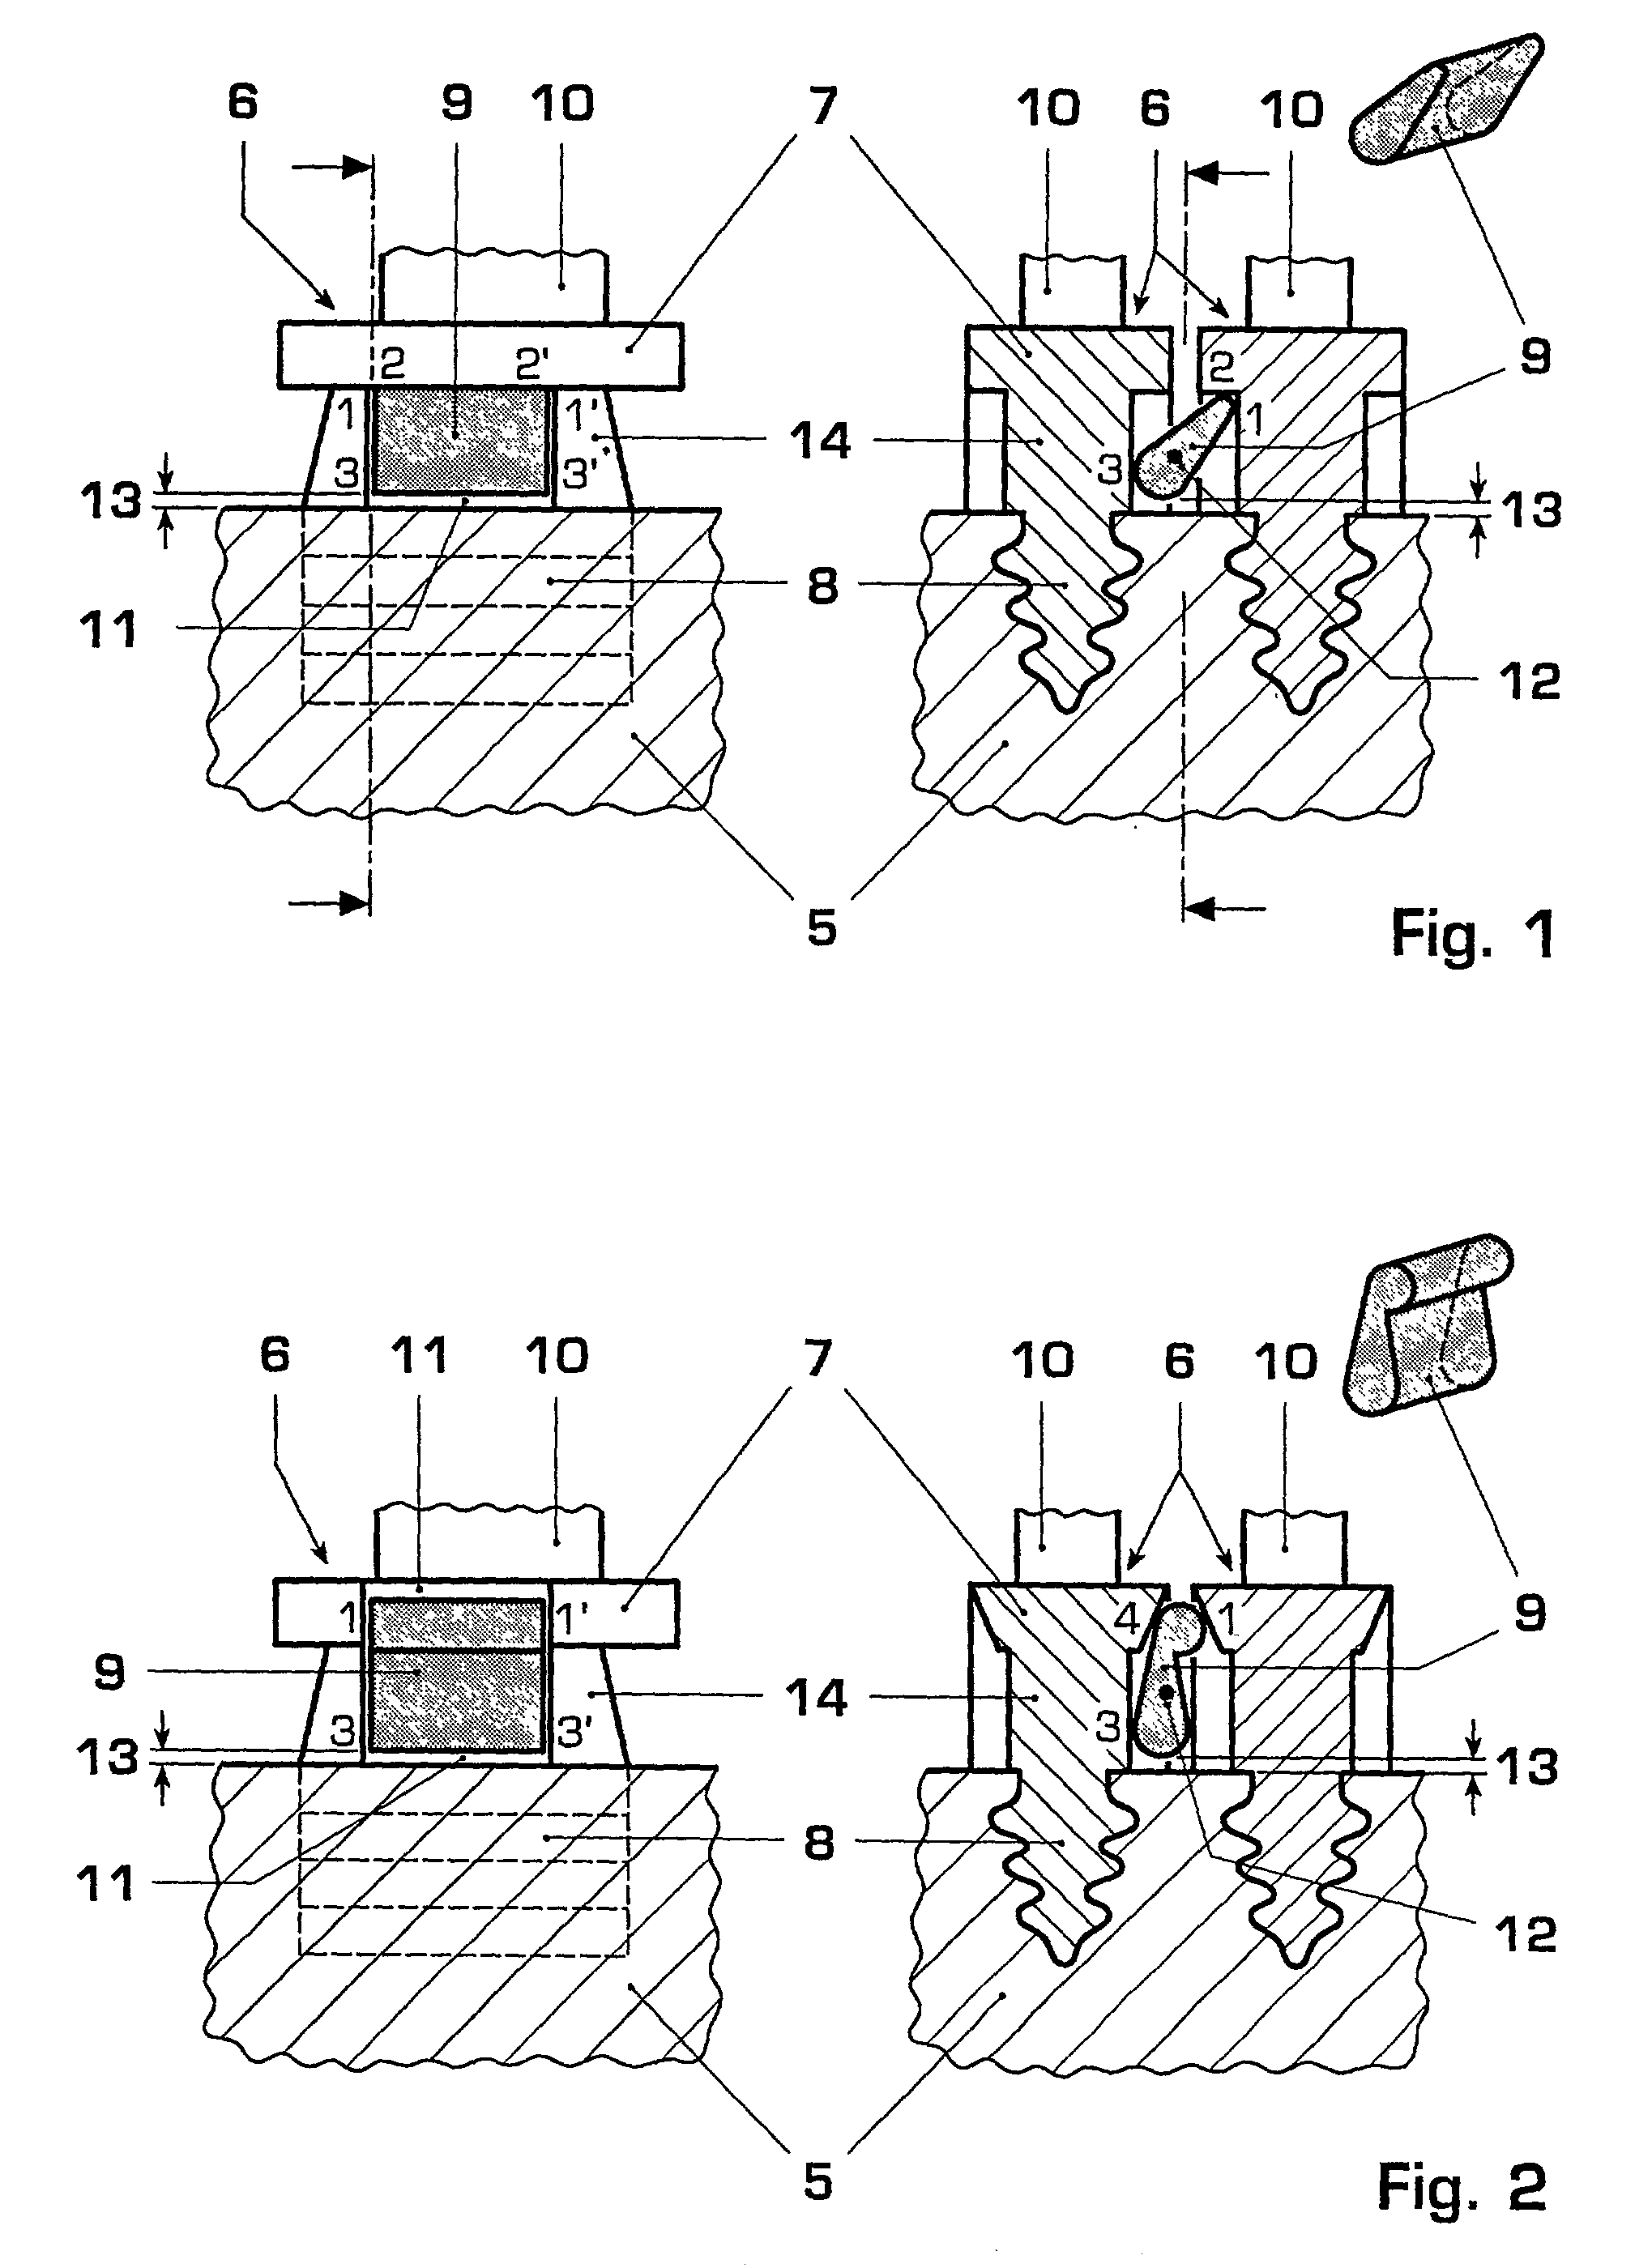 Blade assembly with damping elements